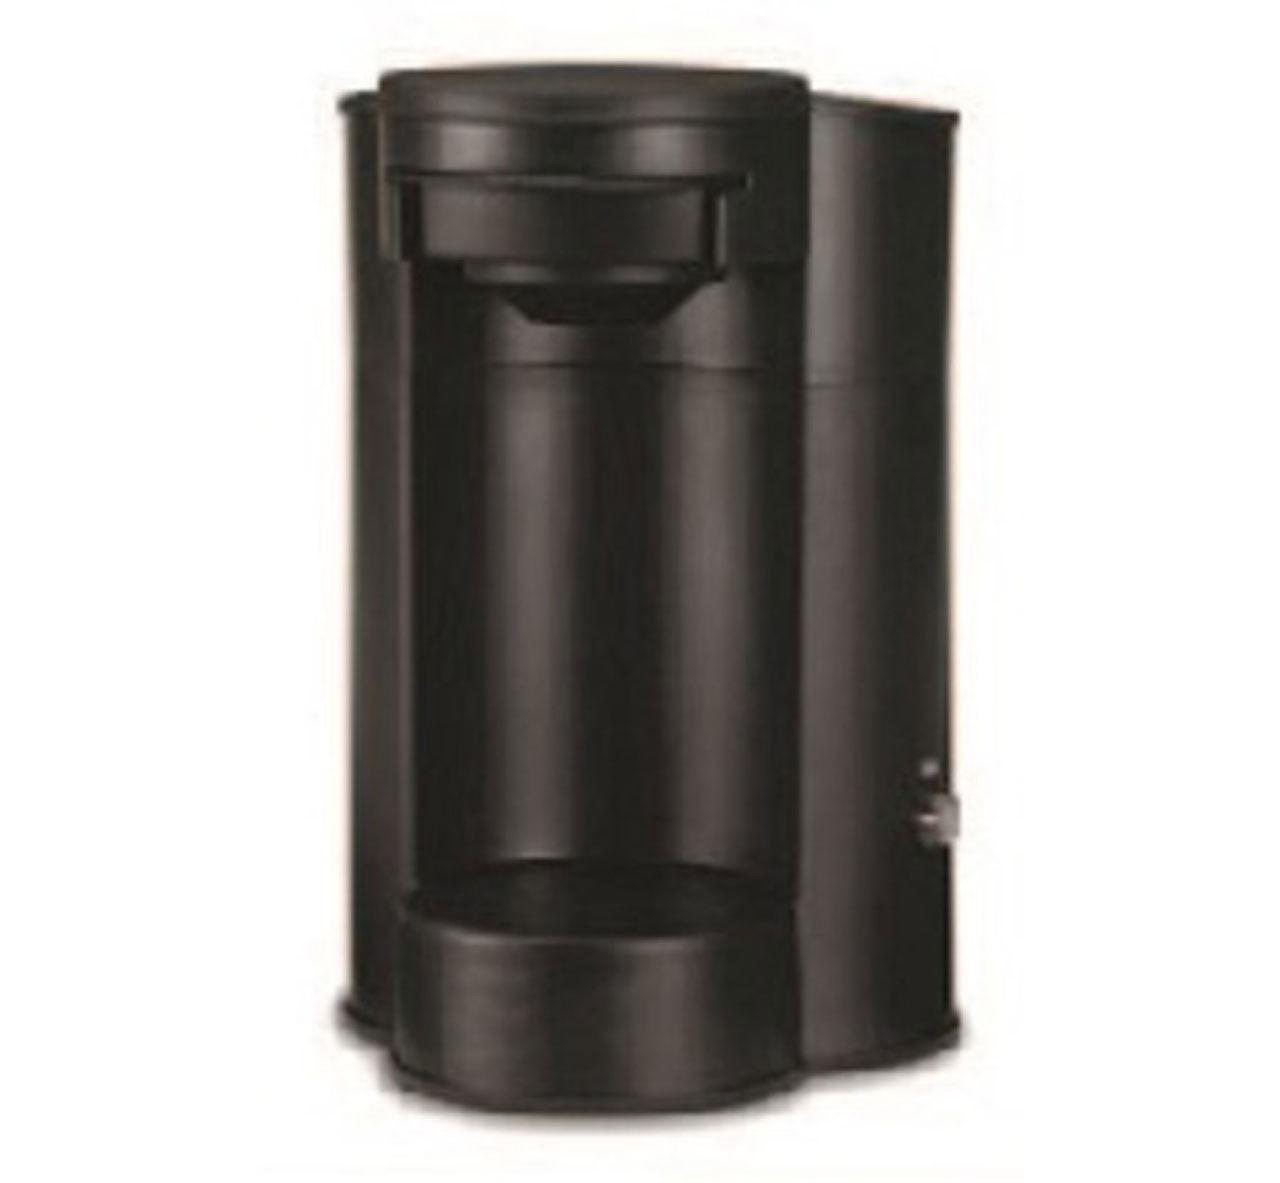 Is the pavy coffee maker designed for a specific location?